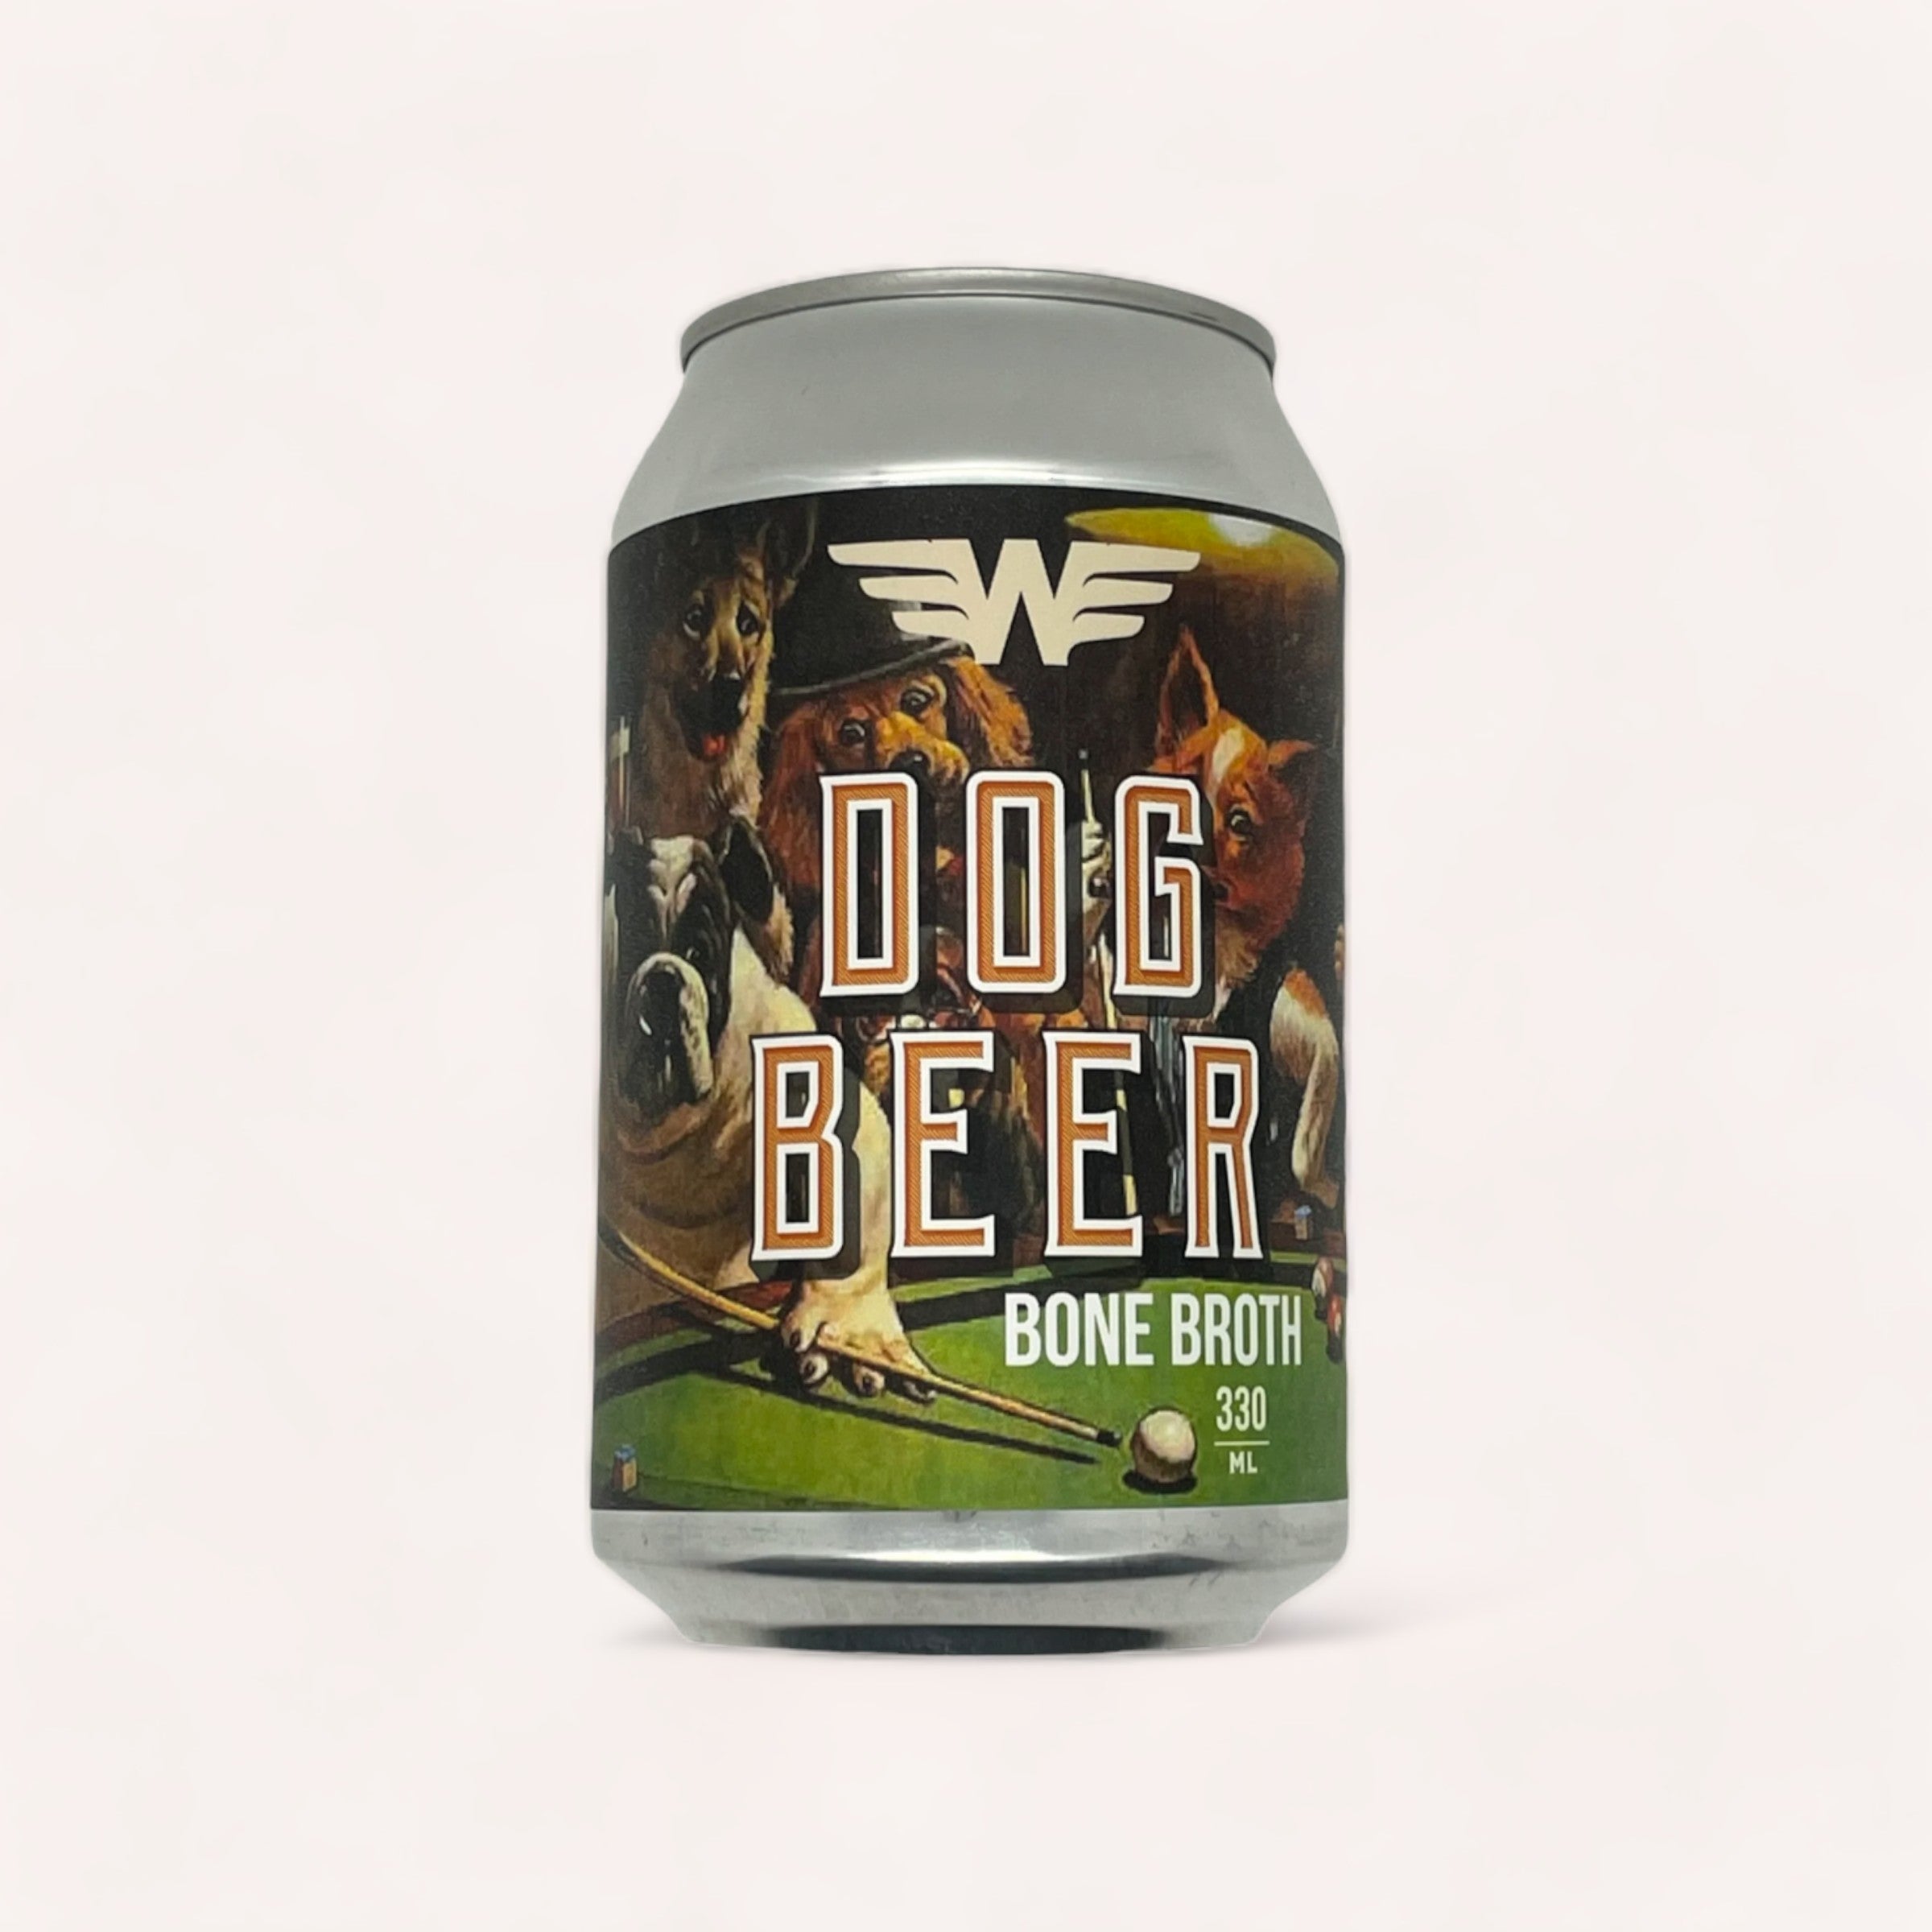 A can of "Dog Beer" by Wigram Brewing Co, featuring images of dogs on the label, marketed as a dog bone broth beverage for canine consumption, product of New Zealand.